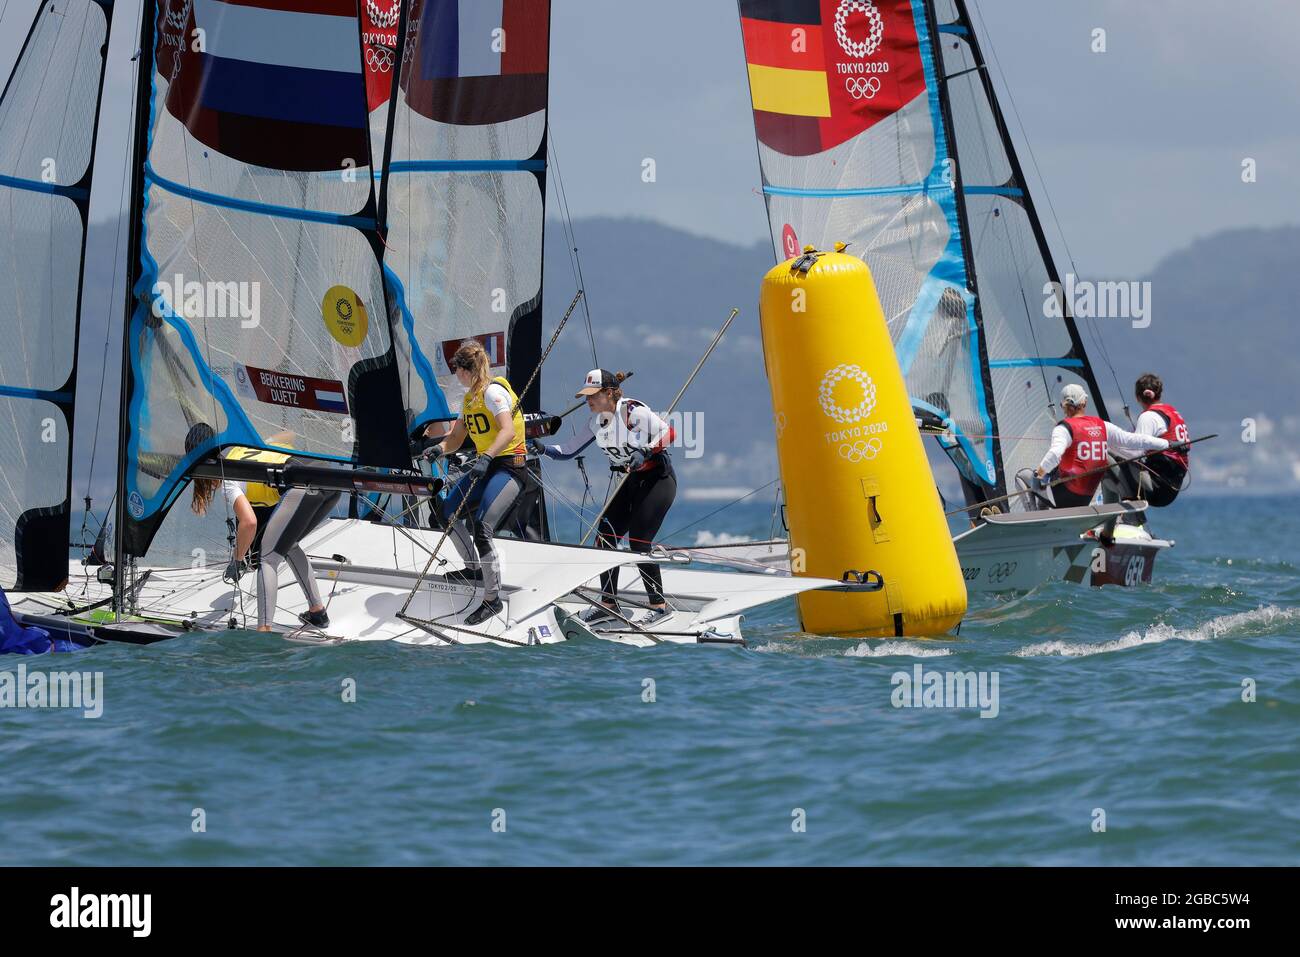 August 3rd 2021 Sailing Women S Skiff 49er Fx Medal Race During The Tokyo 2020 Olympic